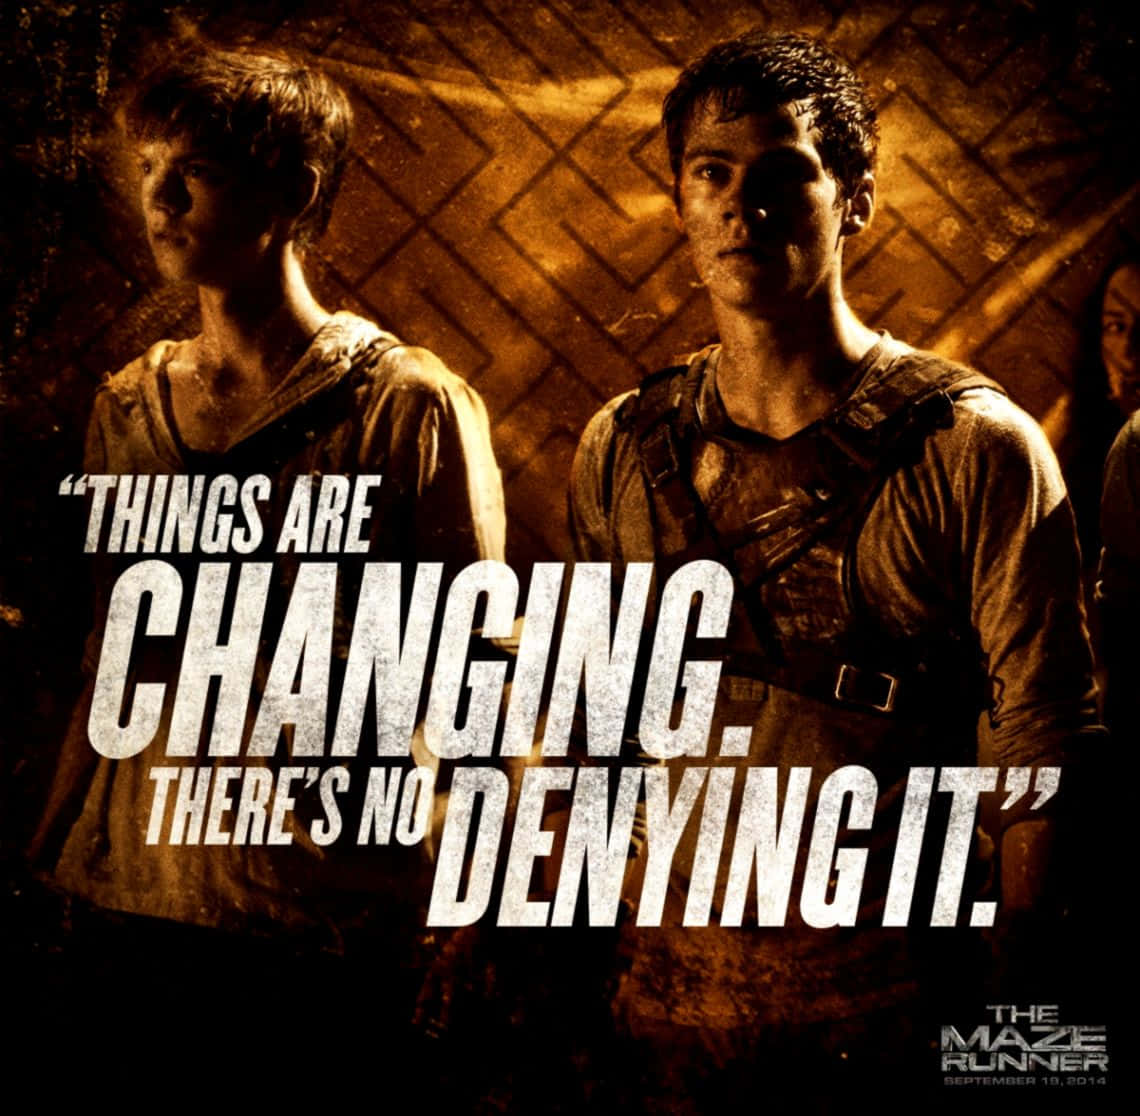 Thomas and the Gladers find their way through the Maze in the dystopian adventure, Maze Runner.